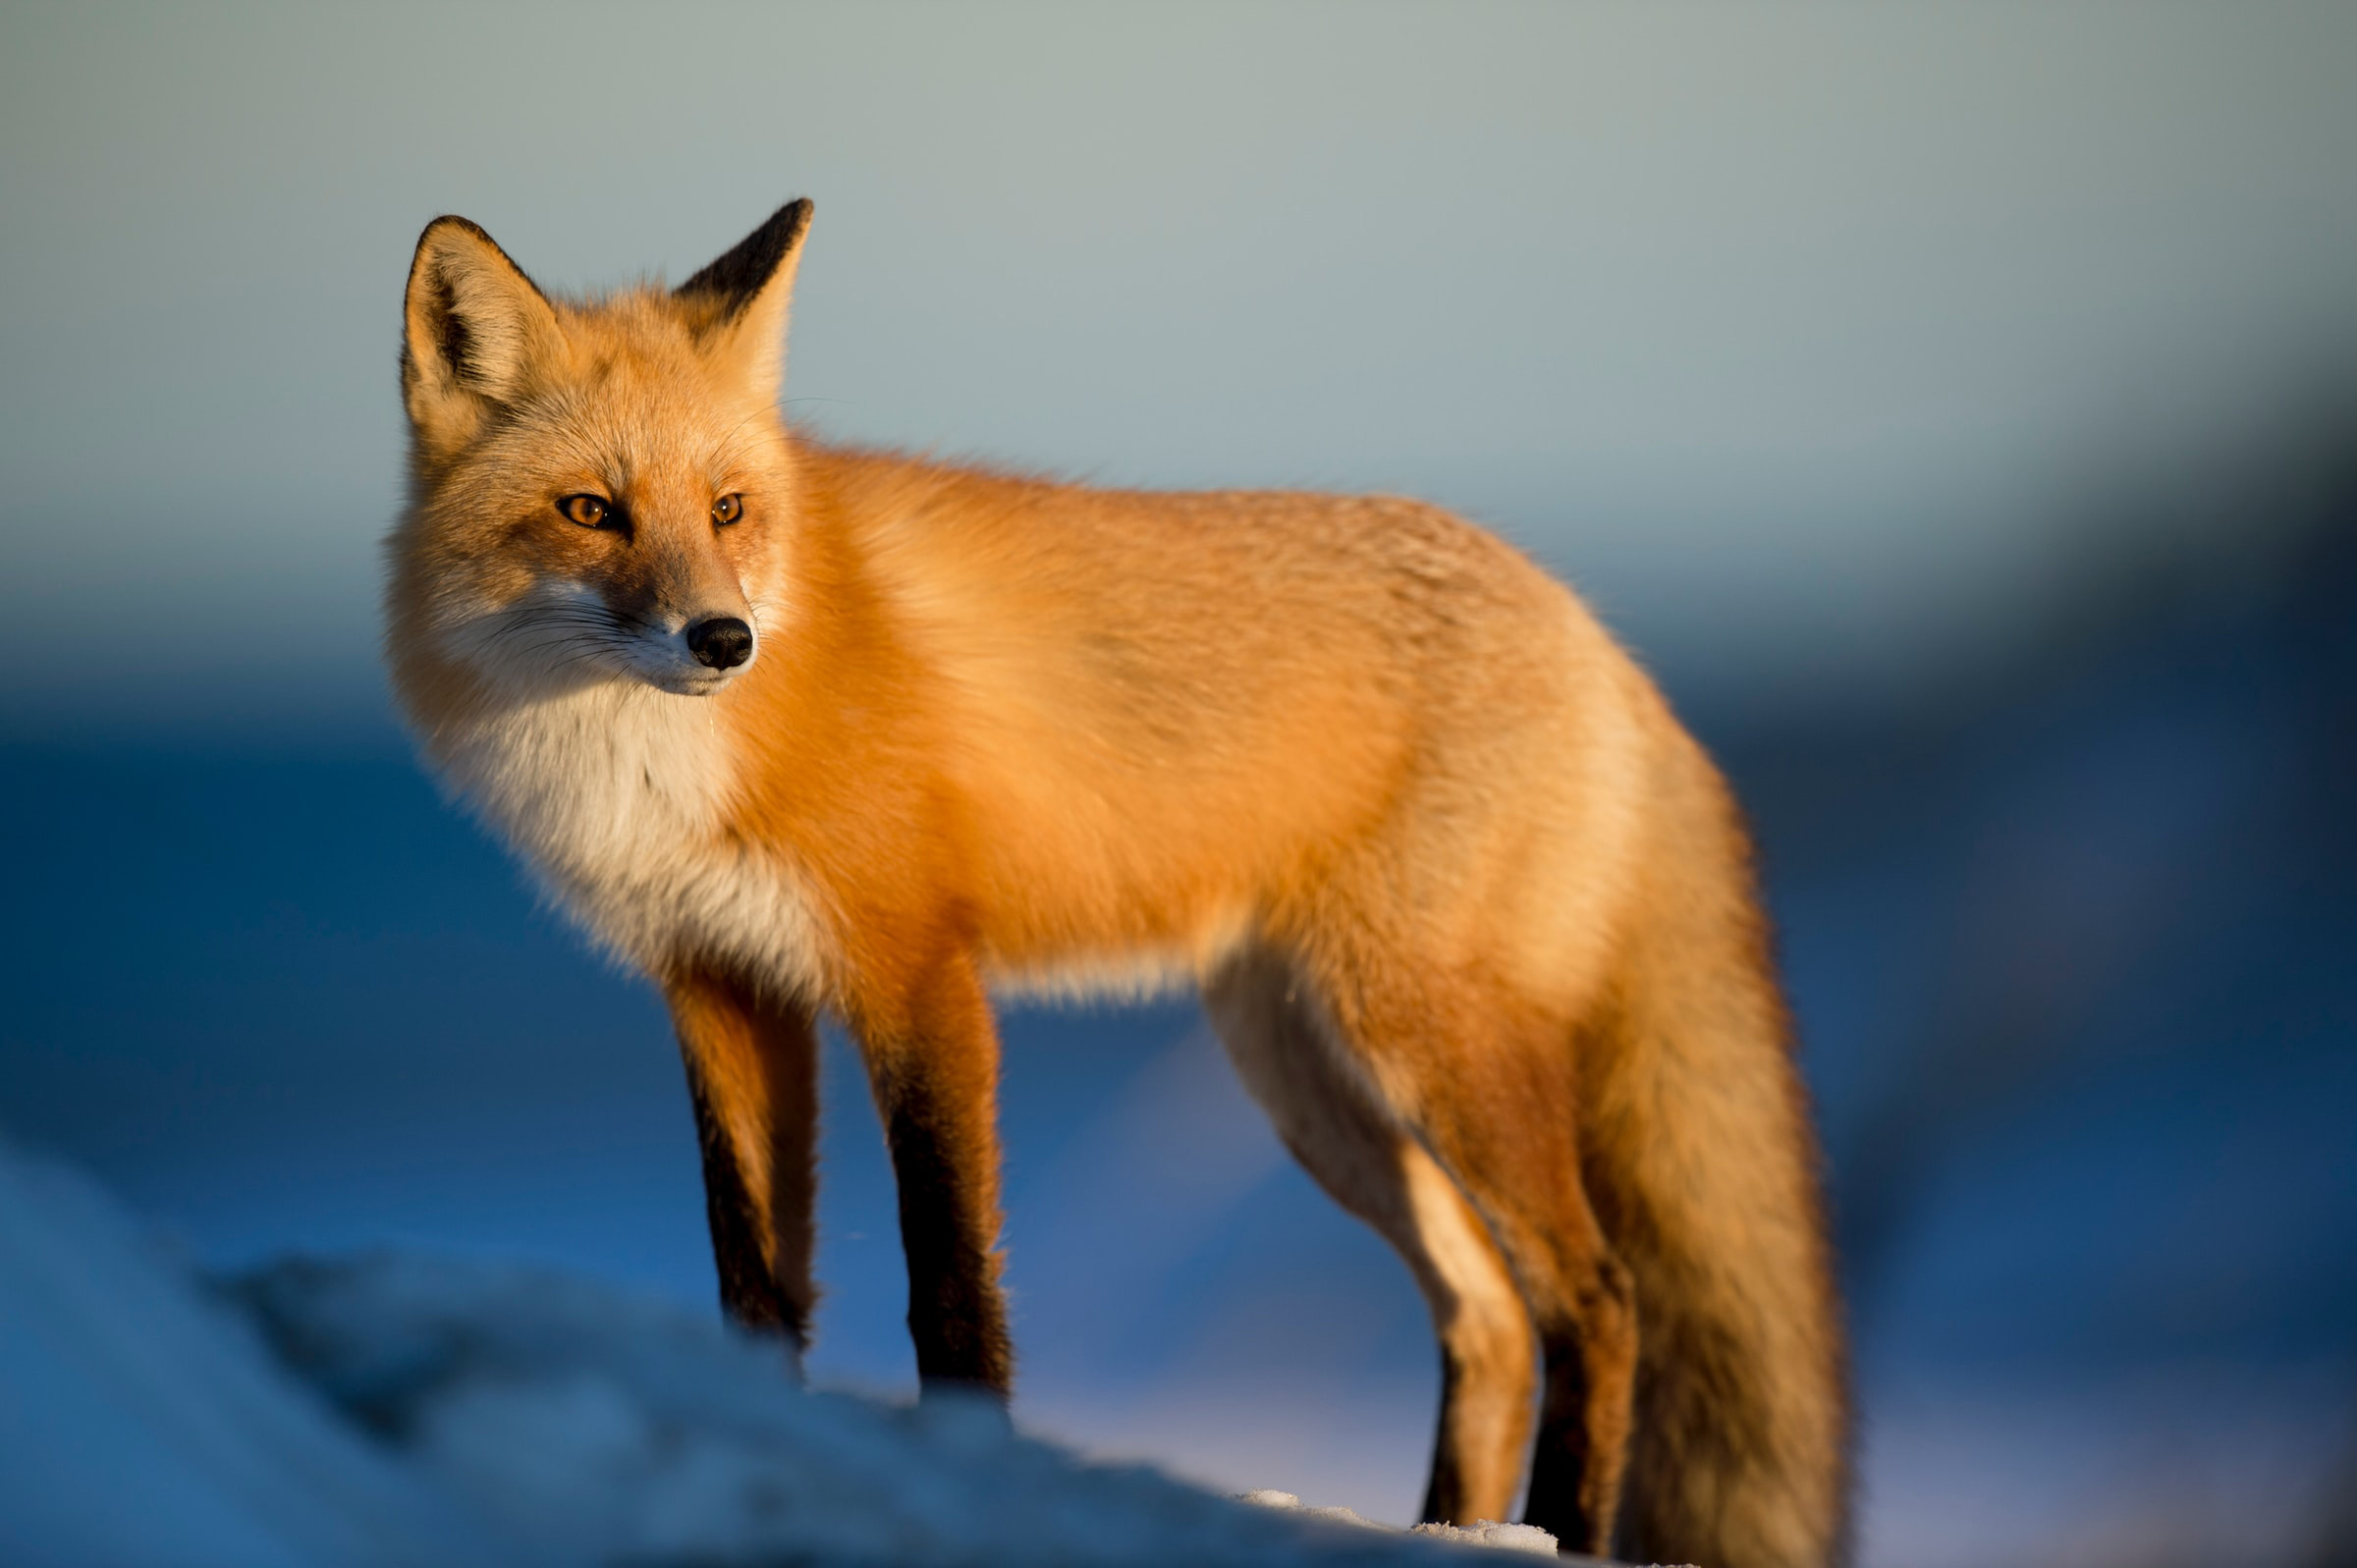 A red fox standing in the snow. (photo © Ray Hennessy via Unsplash)